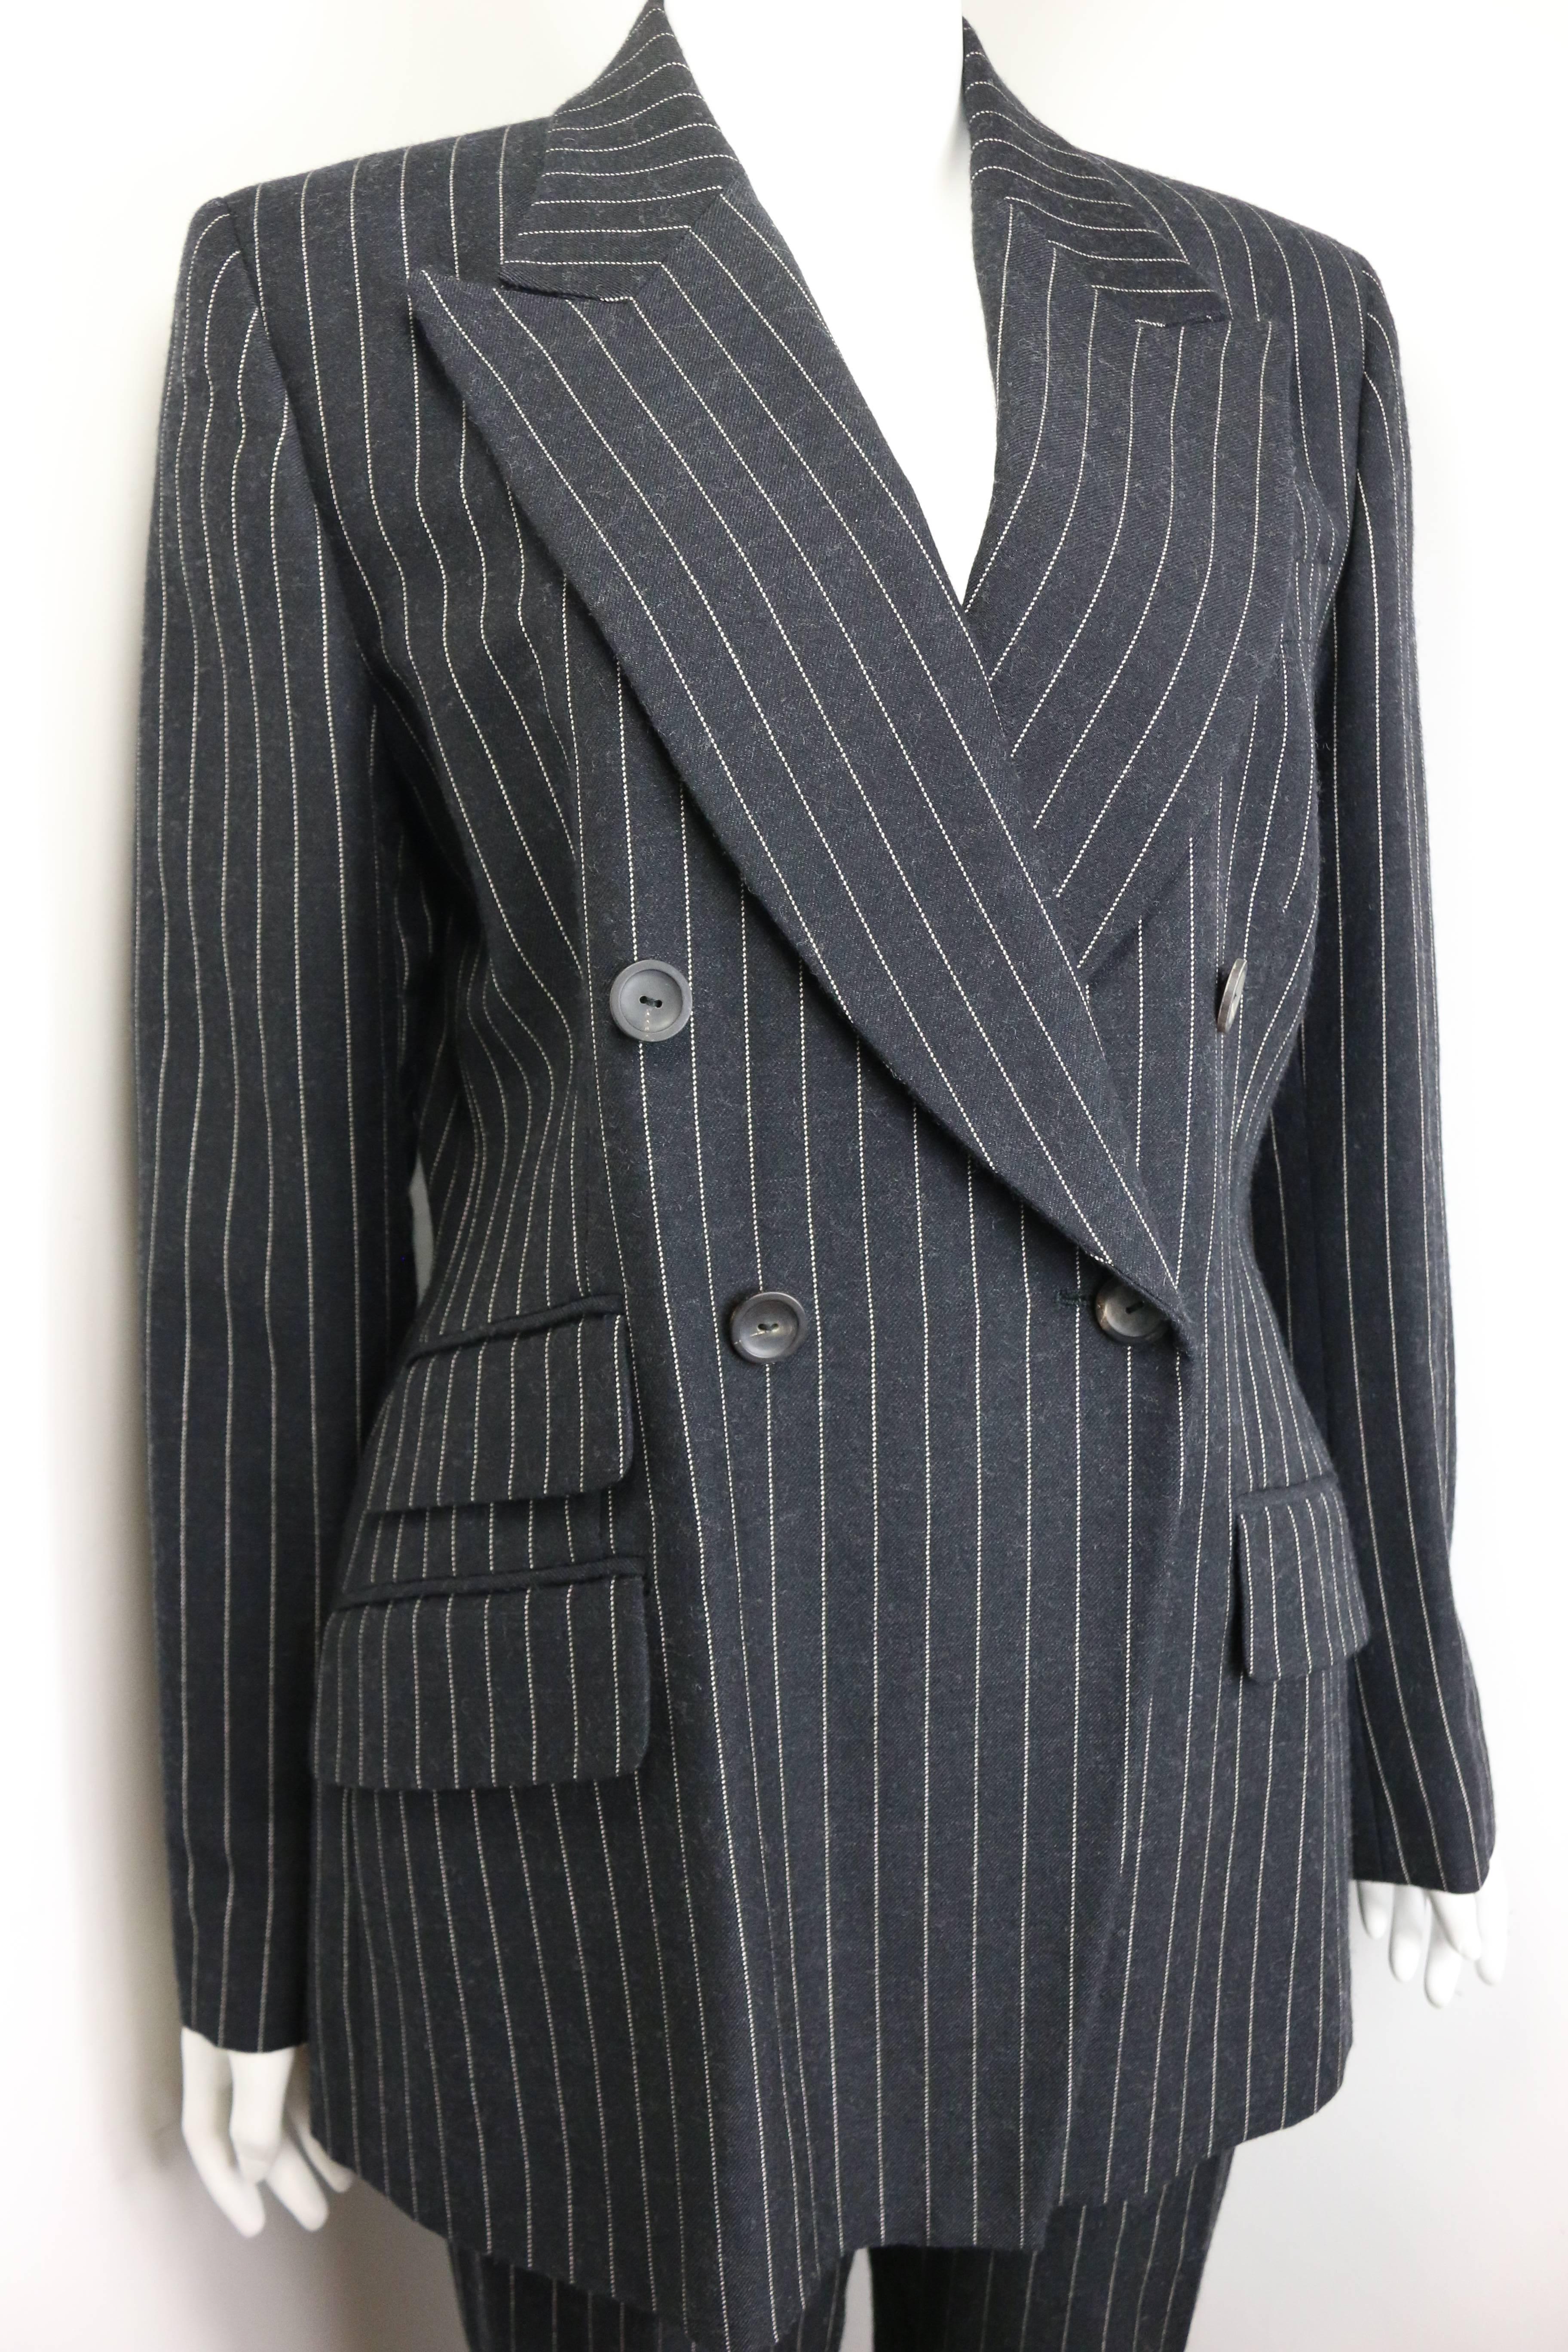 - Gucci by Tom Ford black and white pinstripe wool double breasted pants suit from fall 1996 collection. 

- Made in Italy. 

- Size 44. 

- 100% Wool. Lining: 100% Rayon. 

